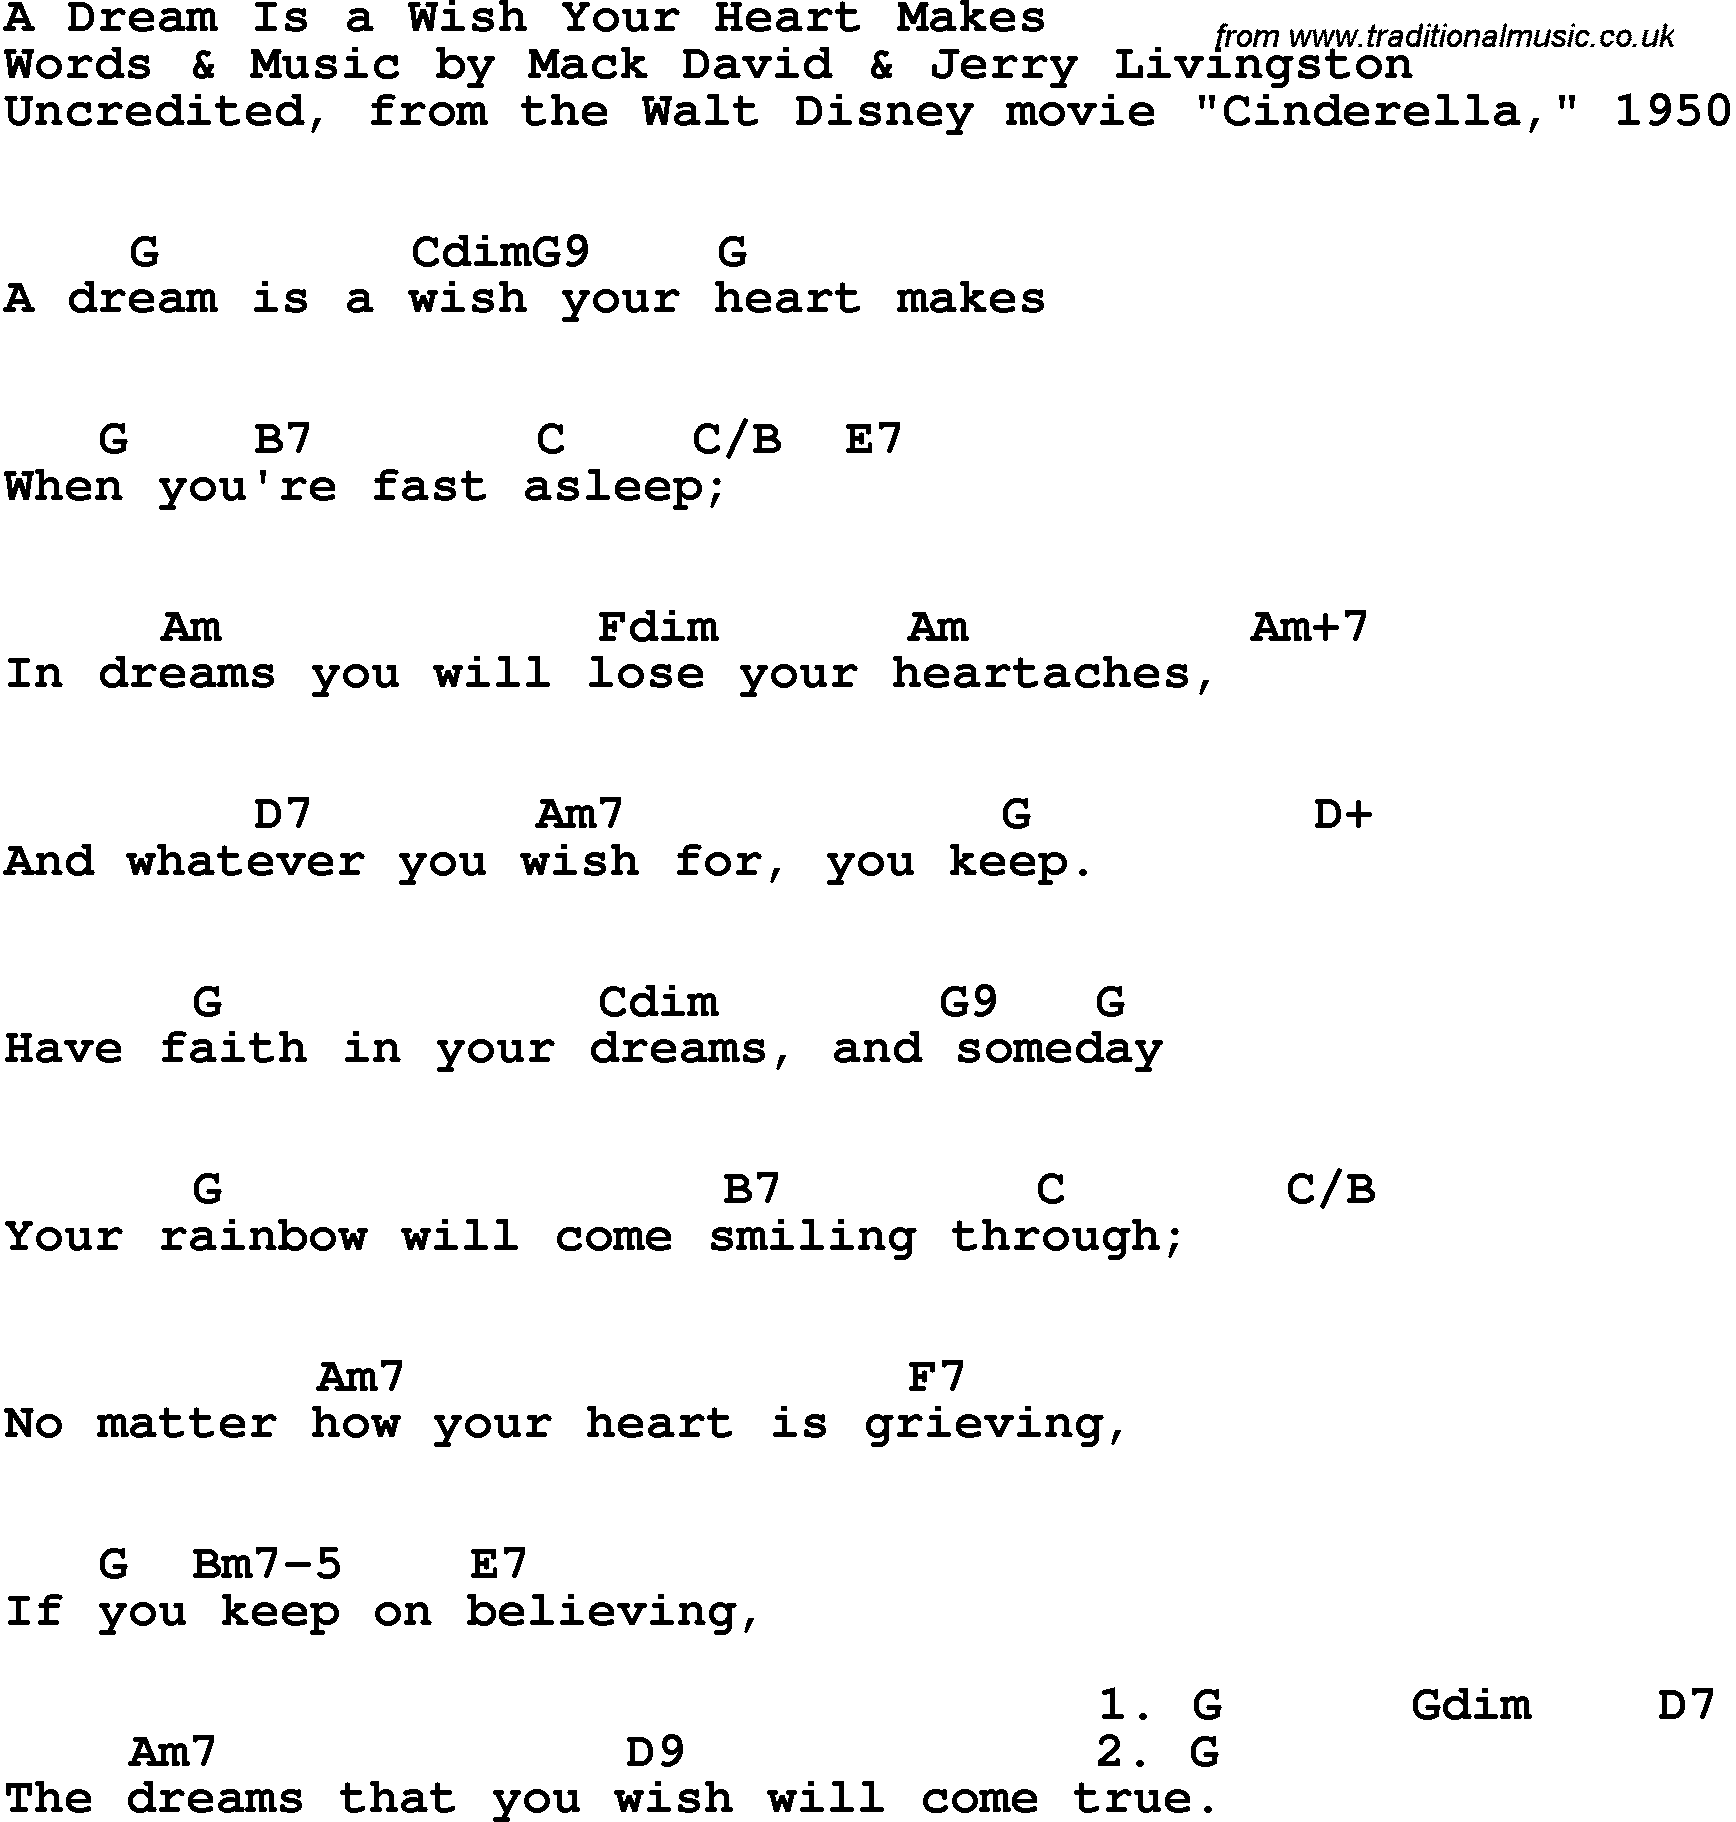 Song Lyrics with guitar chords for A Dream Is A Wish Your Heart Makes - From The Walt Disney Movie Cinderella, 1950